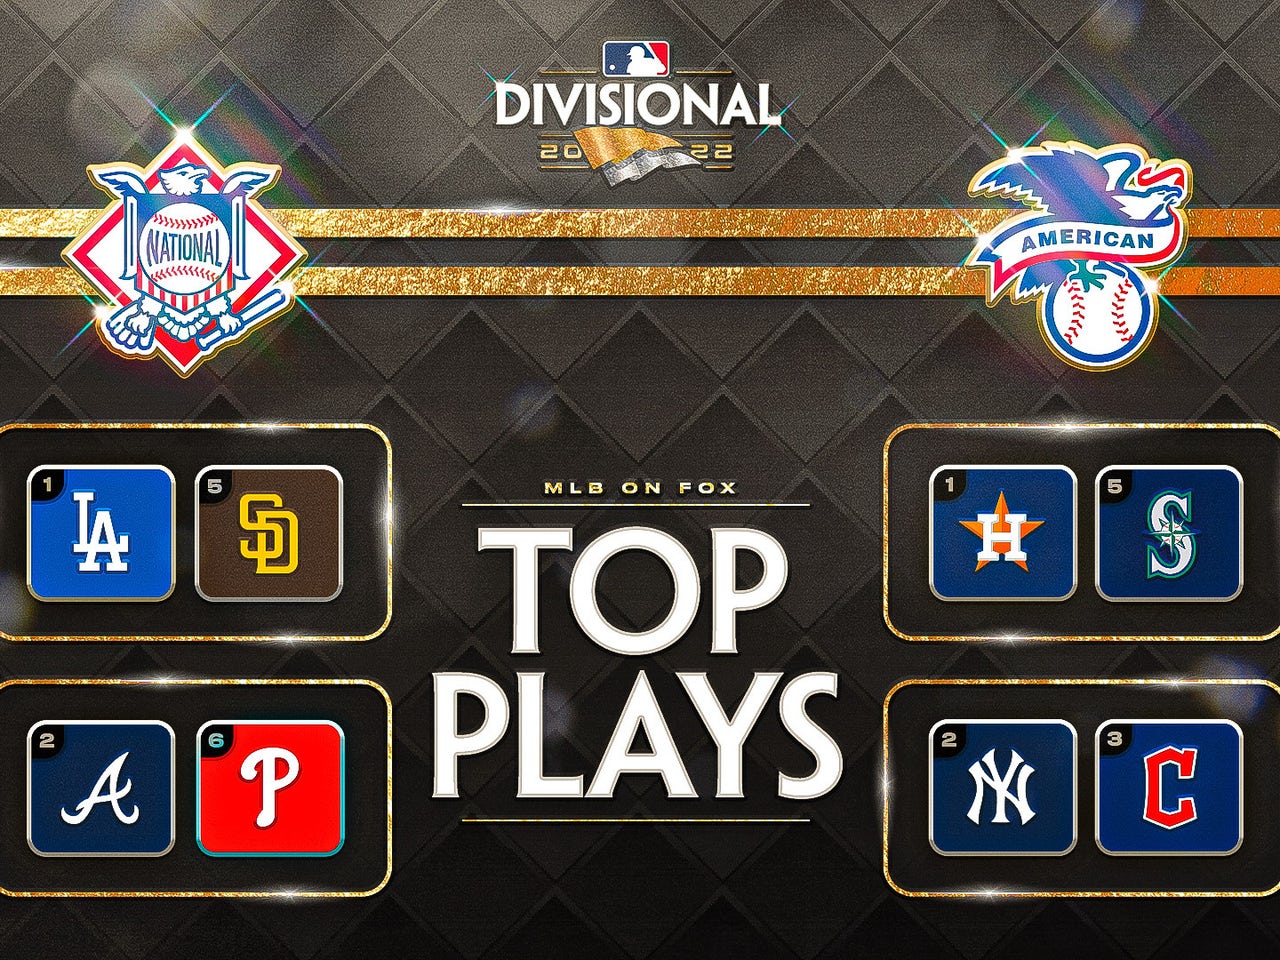 MLB standings: Phillies top Orioles, pull into three-way tie for